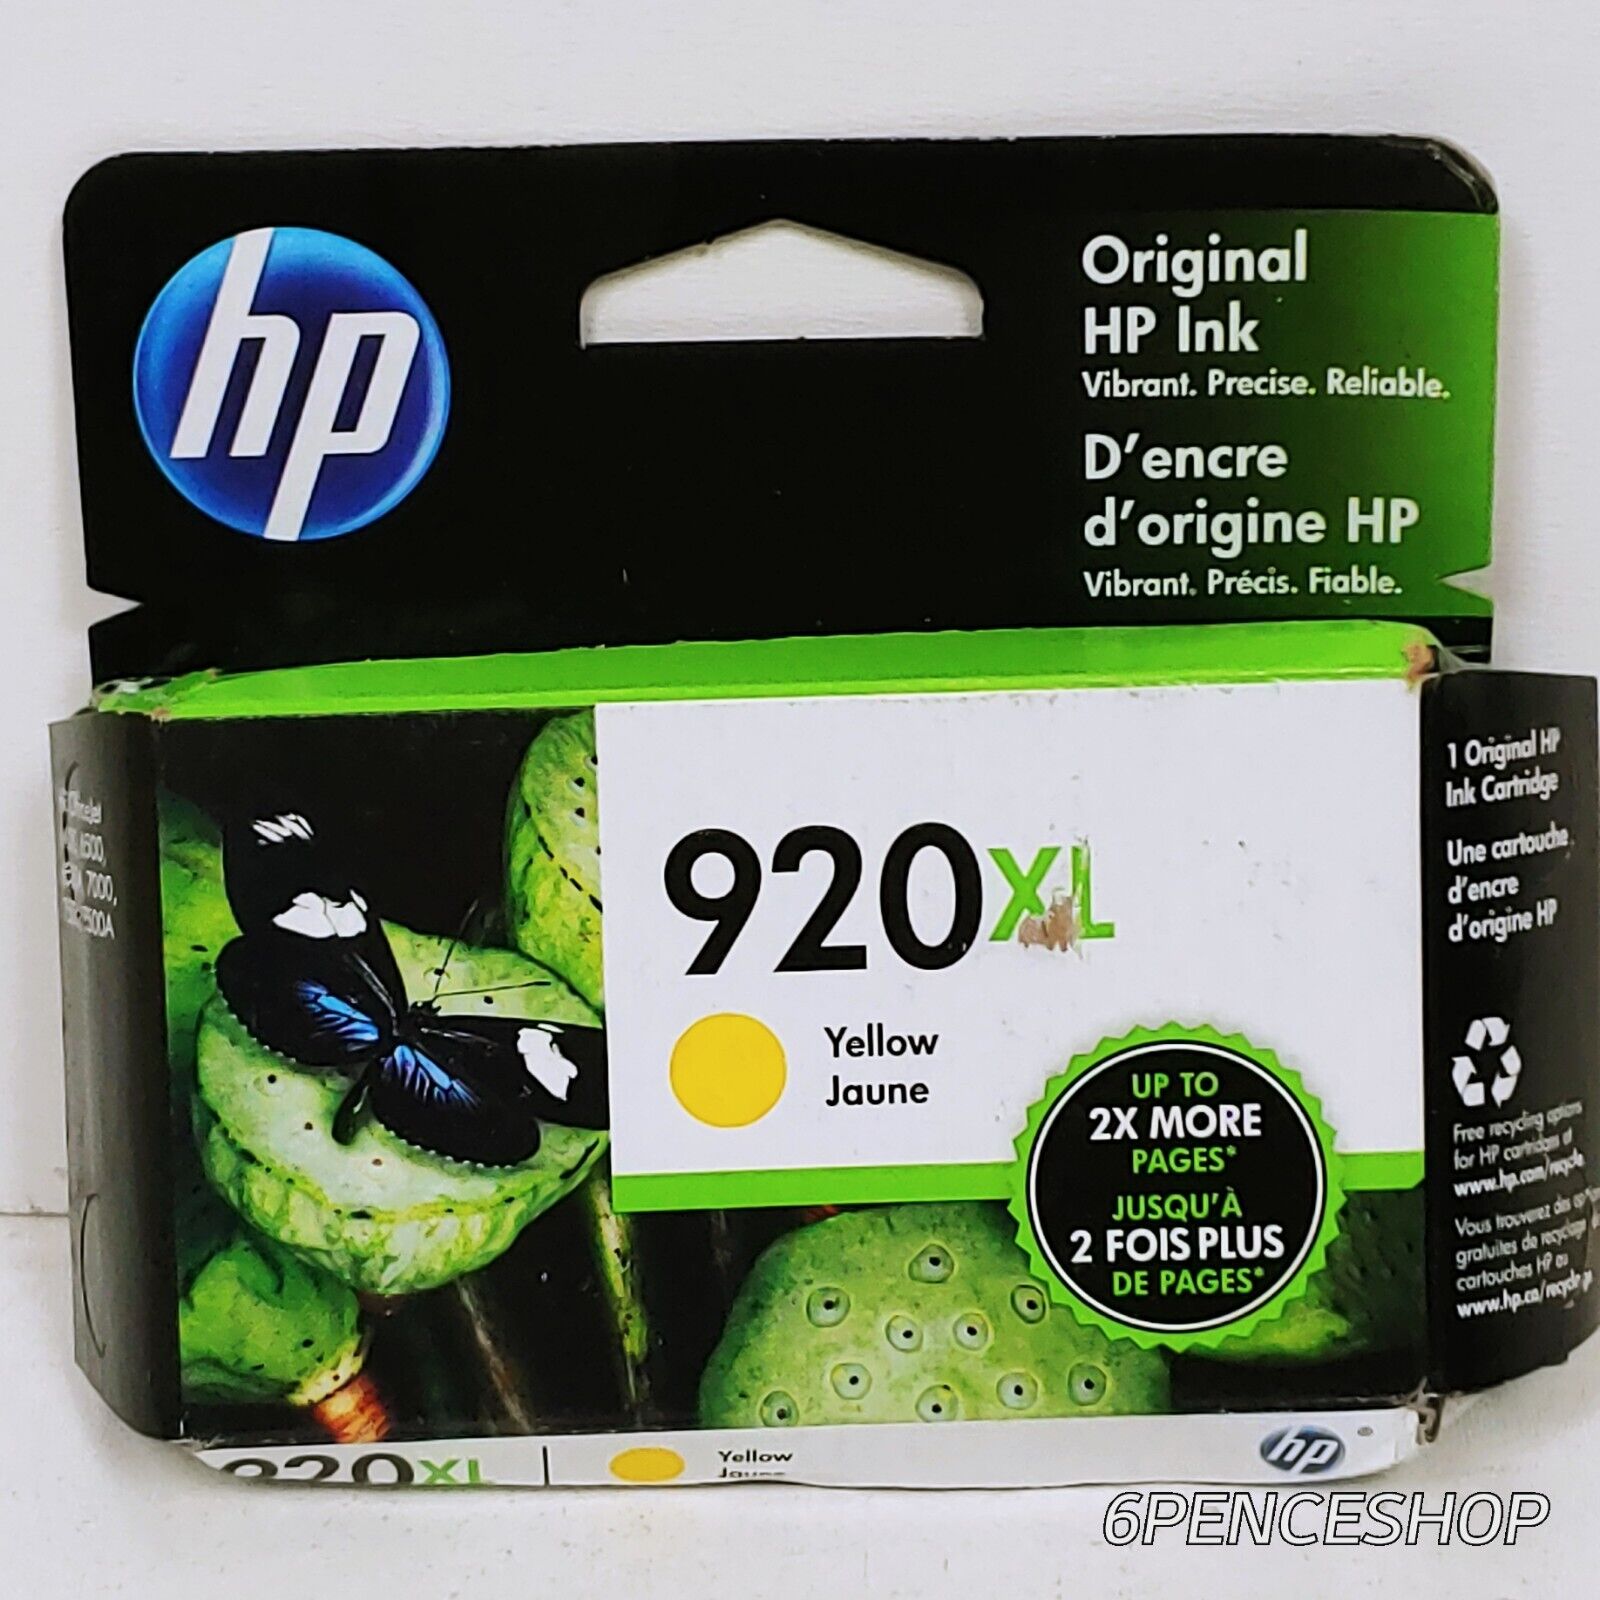 EXP 01/2022 IMPERFECT BOX NEW HP 920 XL Yellow Ink Cartridge CD974AN